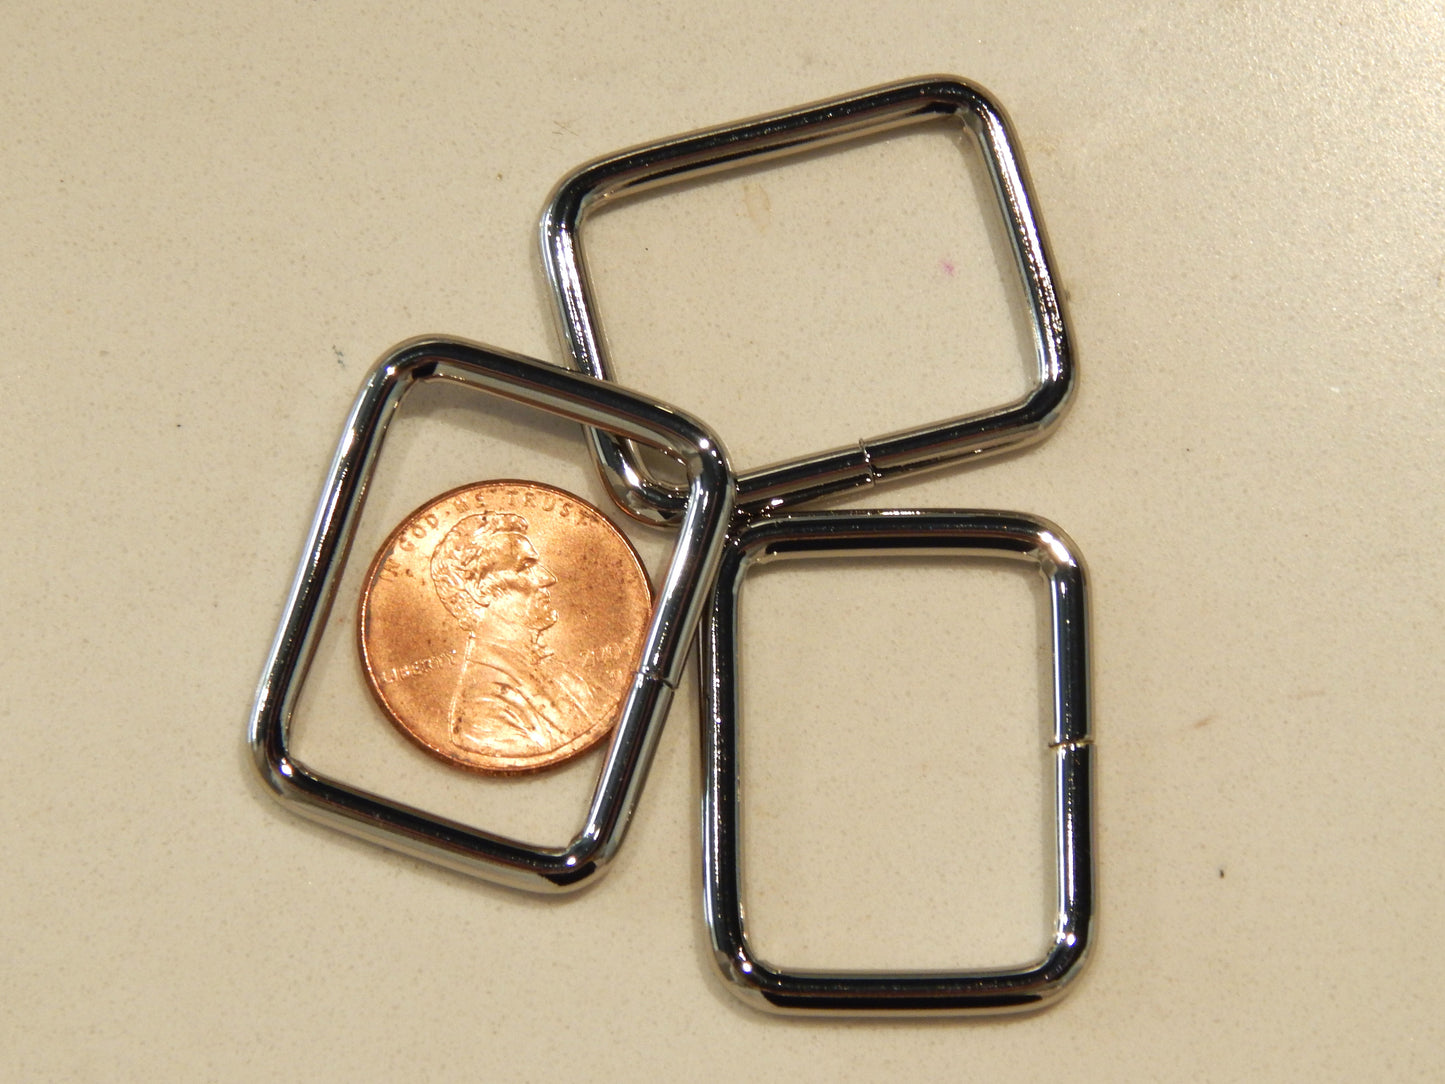 Rectangle Rings - 1" - Gold, Silver, & Iridescent